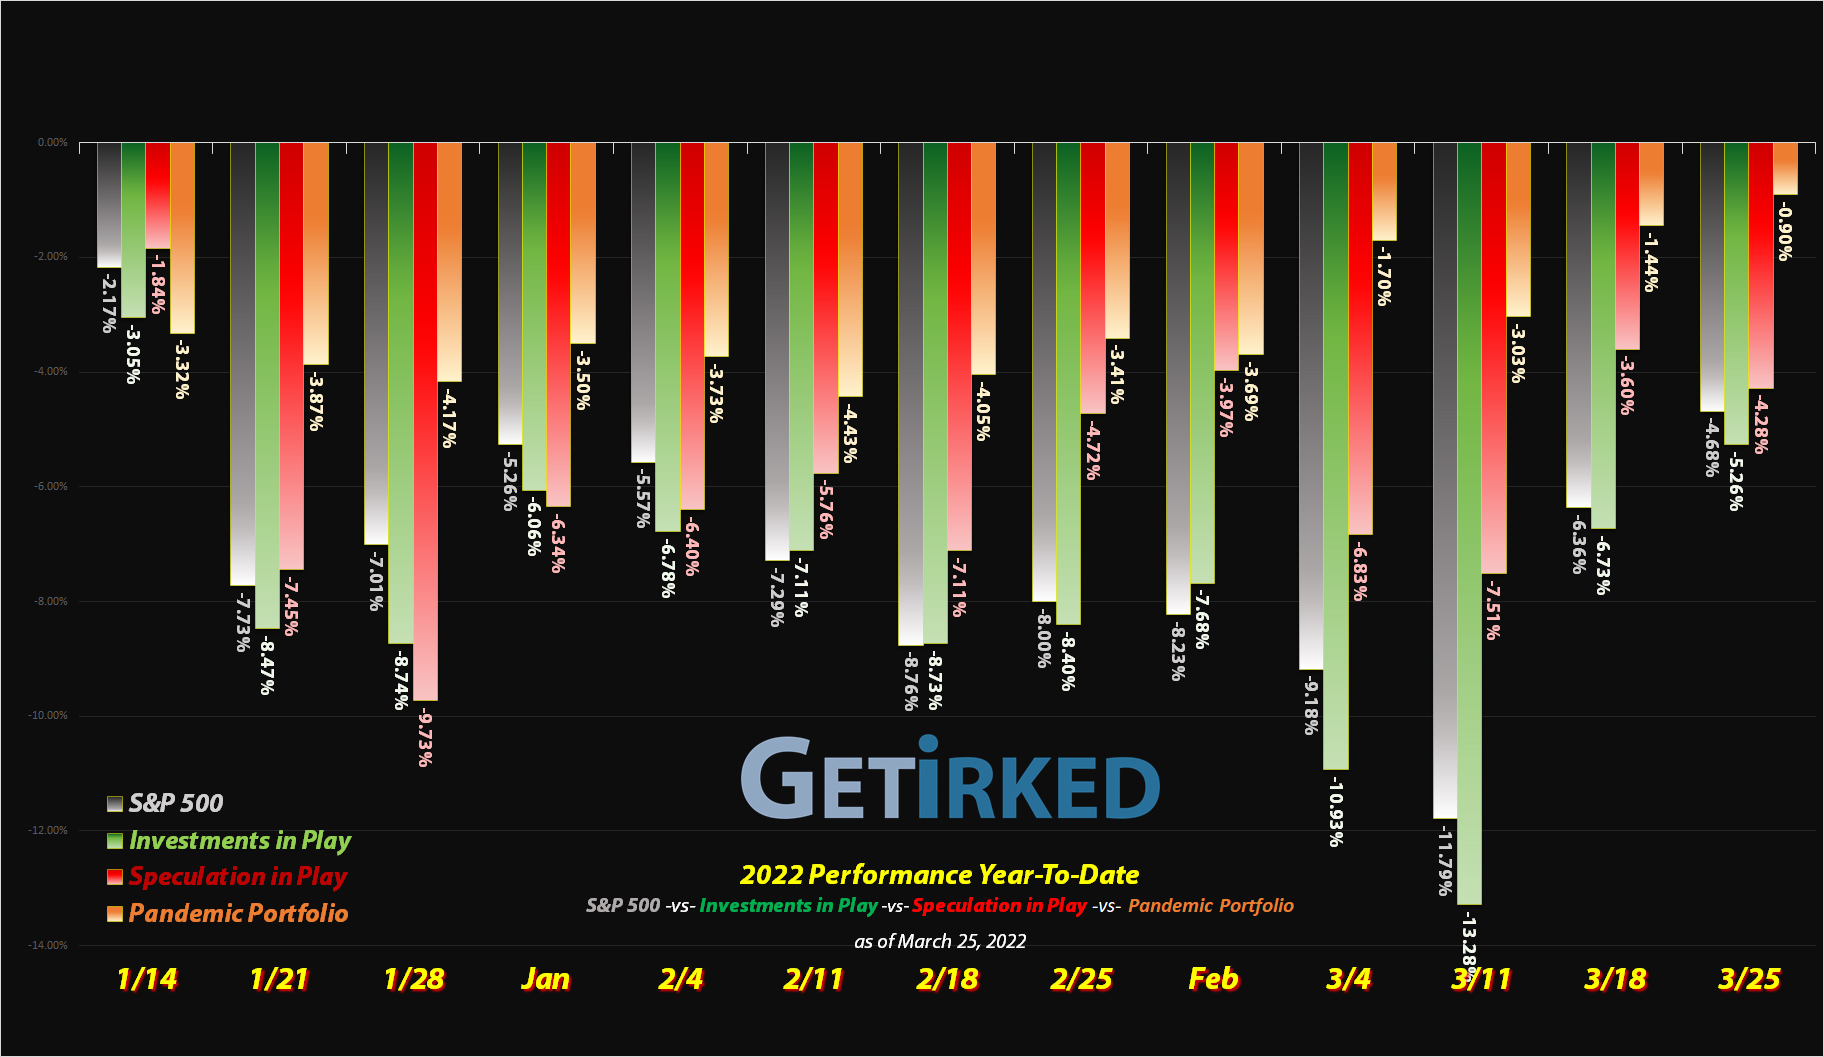 Get Irked - Year-to-Date Performance - Investments in Play vs. Speculation in Play - 2021 Year-to-Date Performance